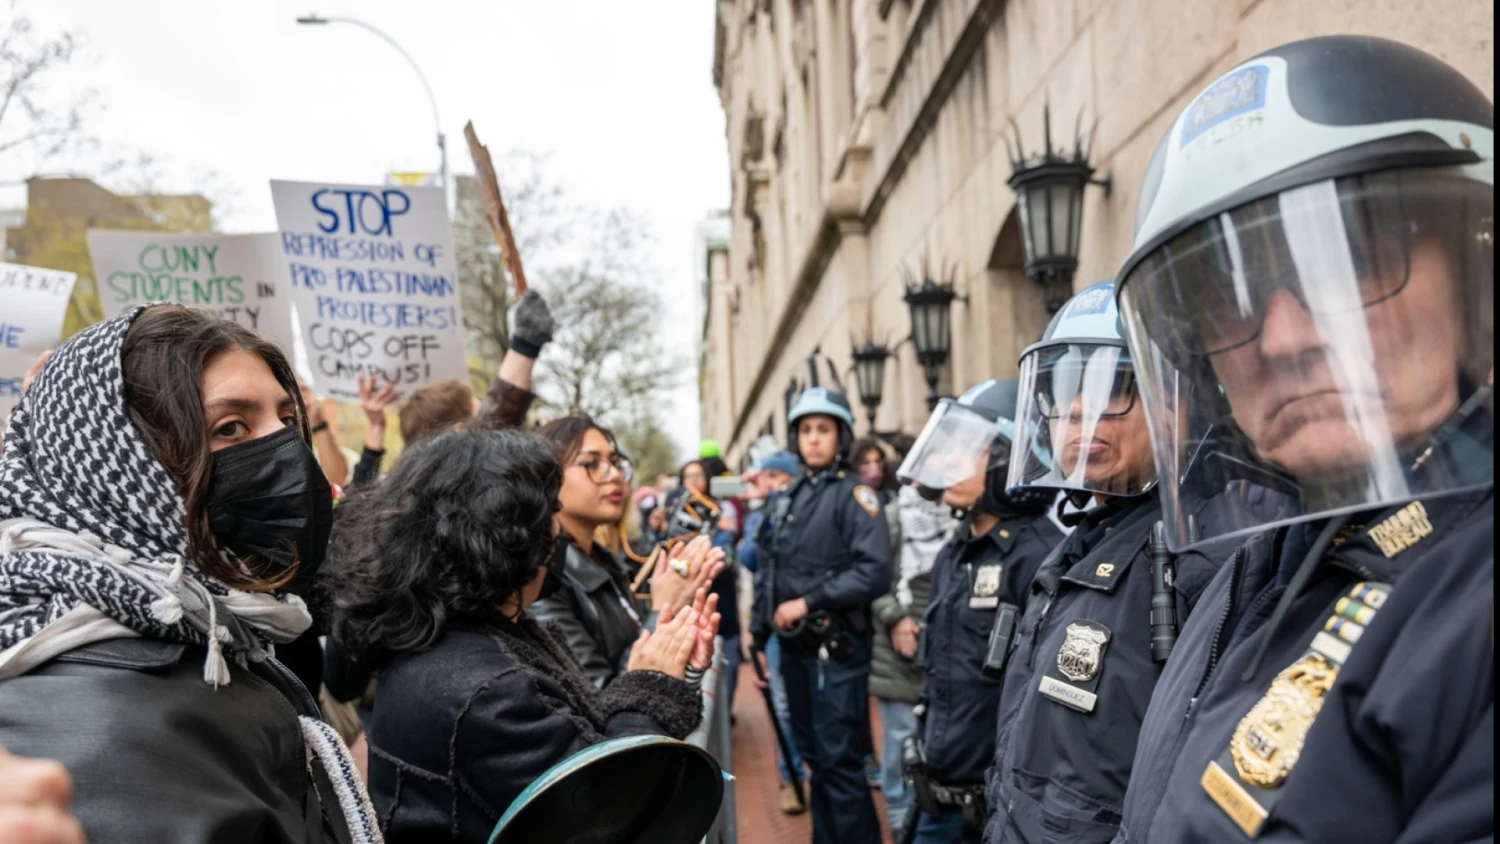 Pro-Palestinian protesters face NYPD crackdown at Columbia University (Credits: NBC News)